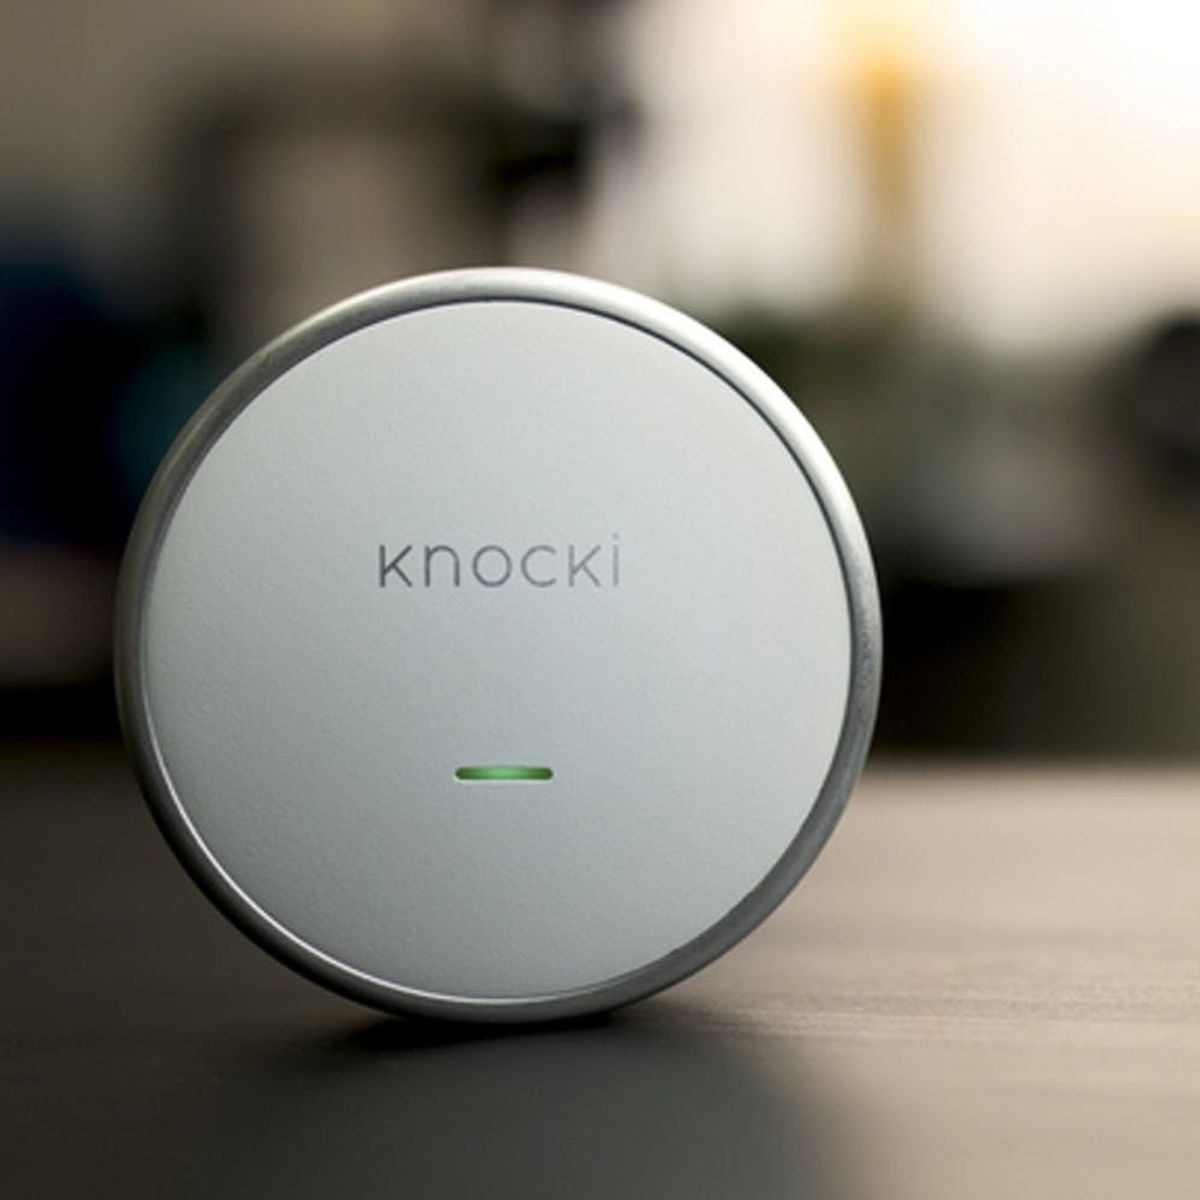 This Genius Kickstarter Turns Your Kitchen Counter into a Knock-Controlled Remote